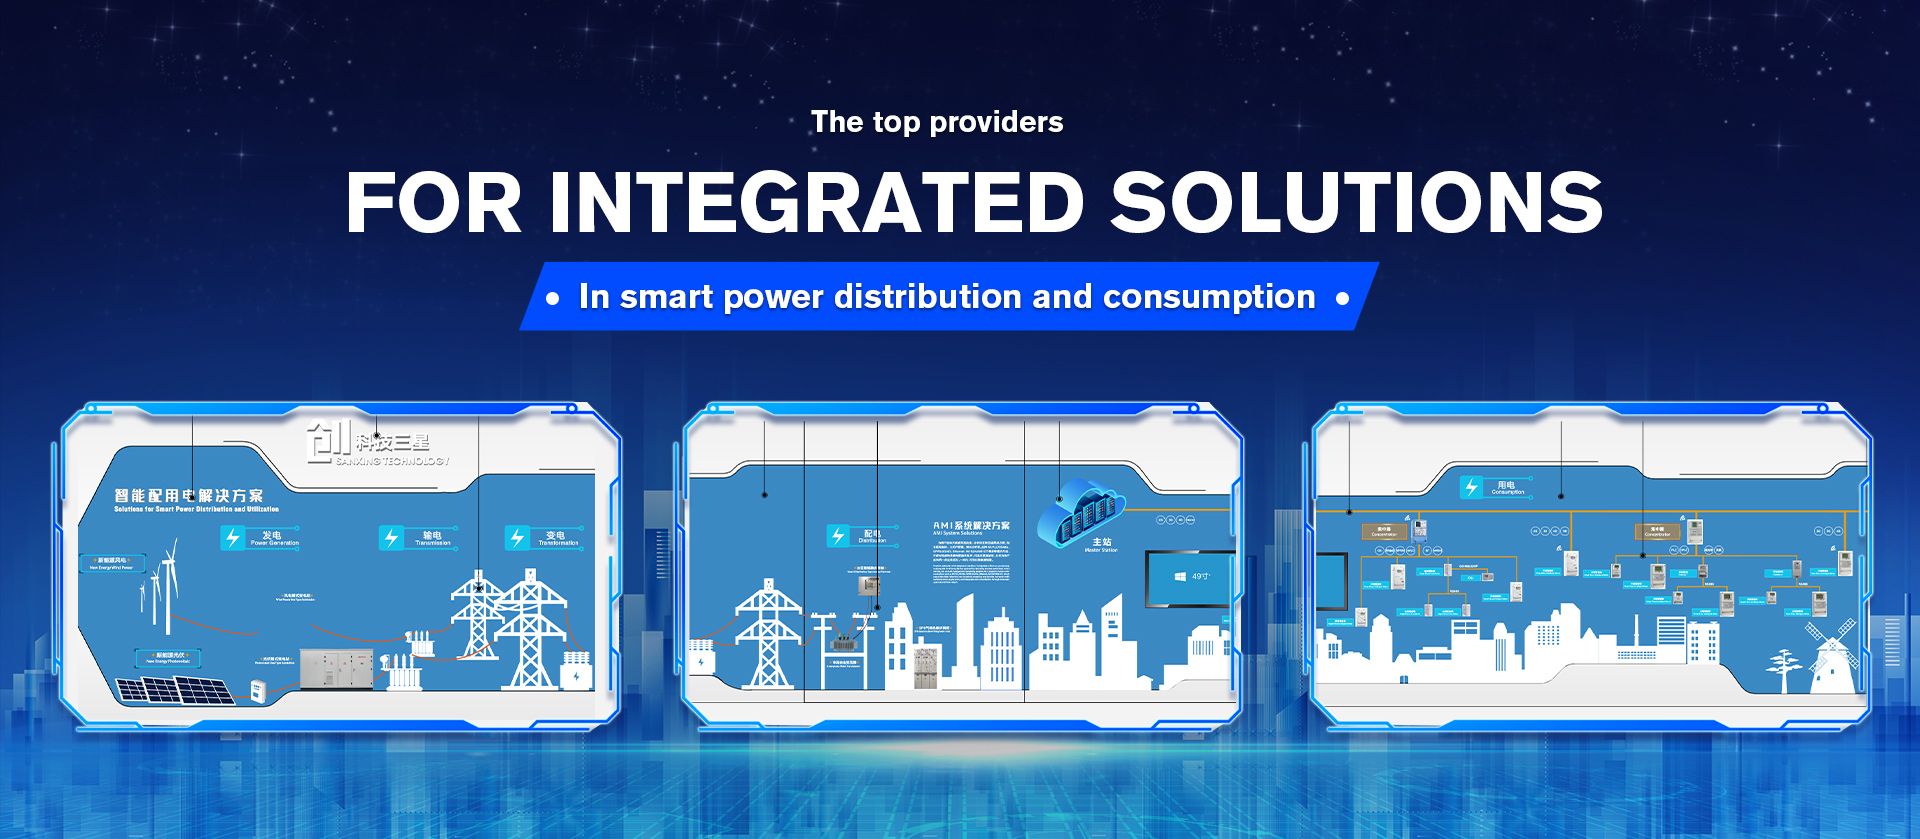 The top providers for integrated solutions in smart power distribution and consumption